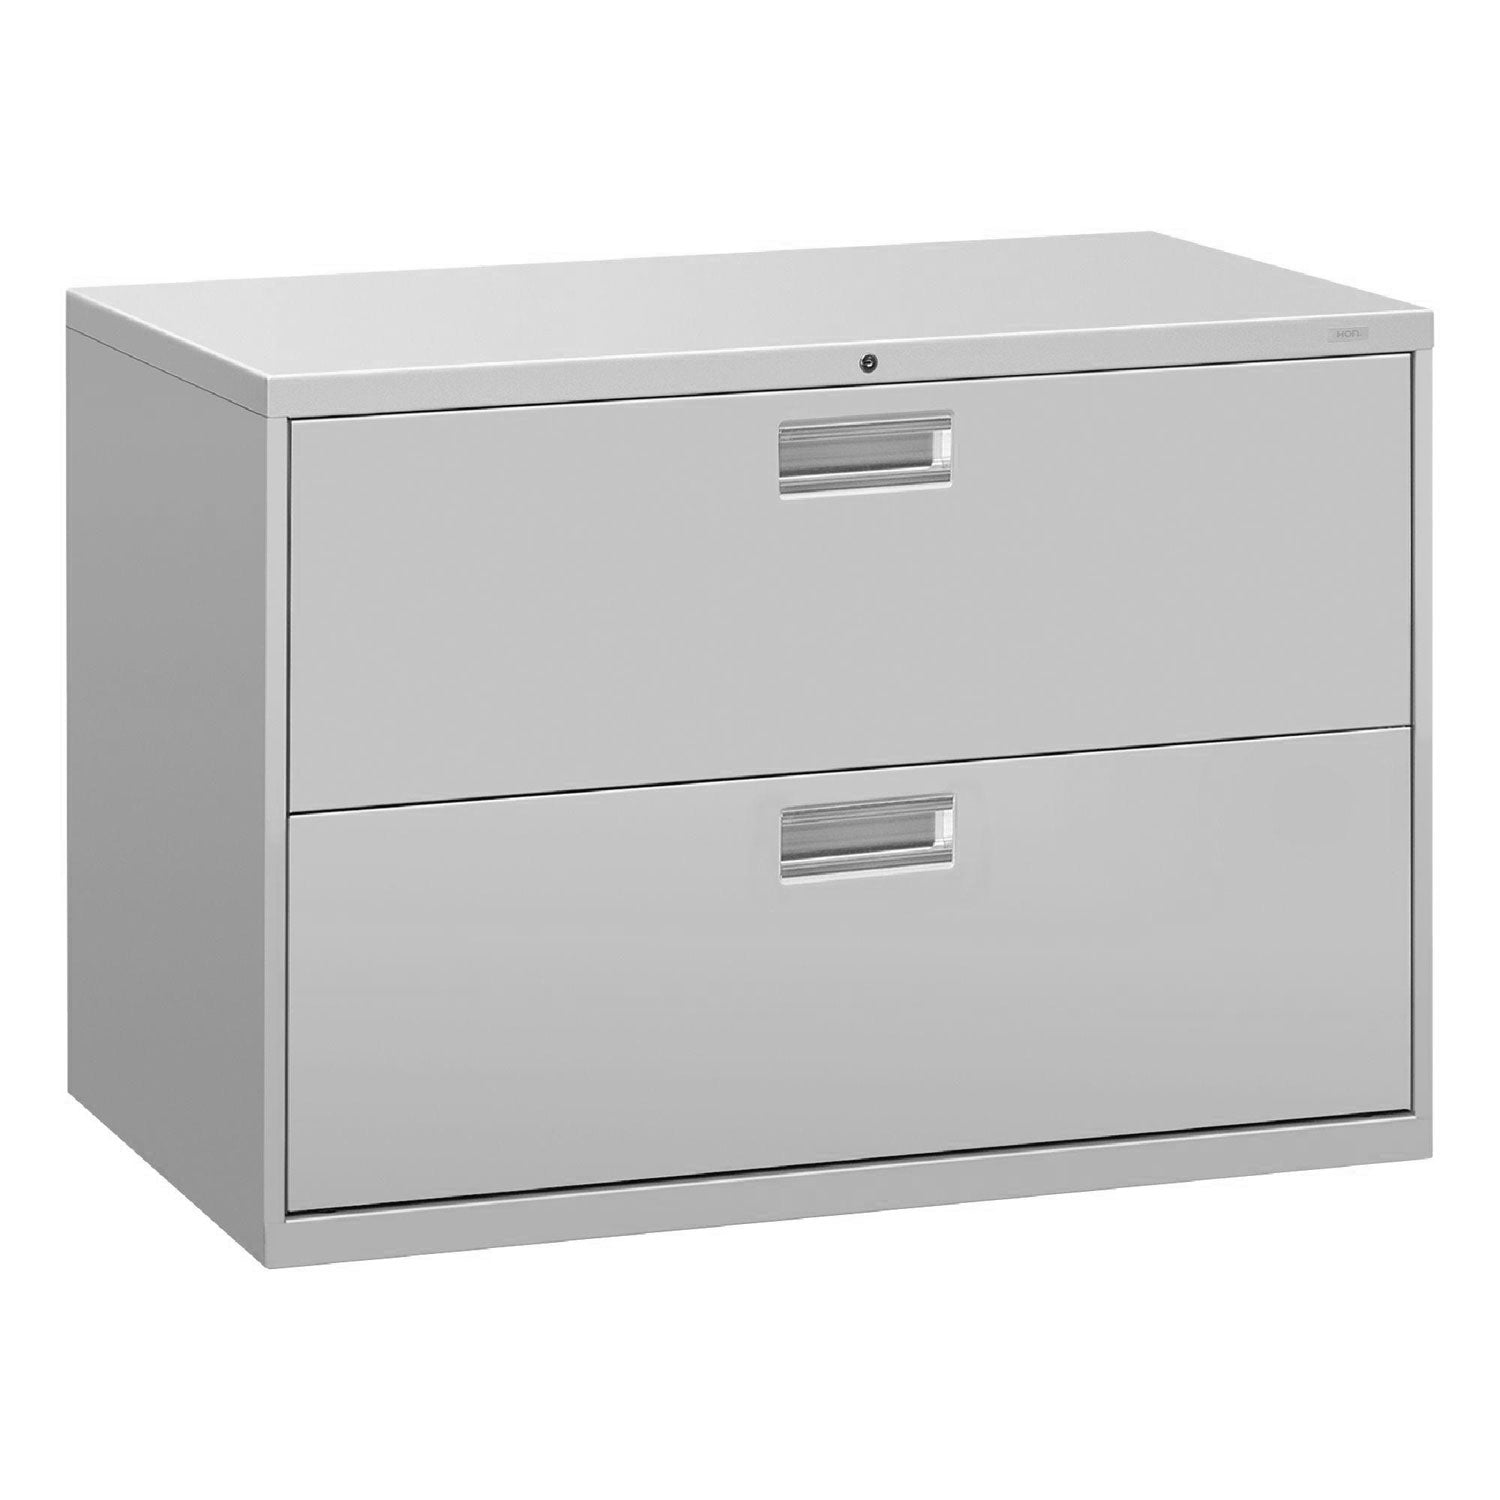 Brigade 600 Series Lateral File, 2 Legal/Letter-Size File Drawers, Light Gray, 42" x 18" x 28 - 